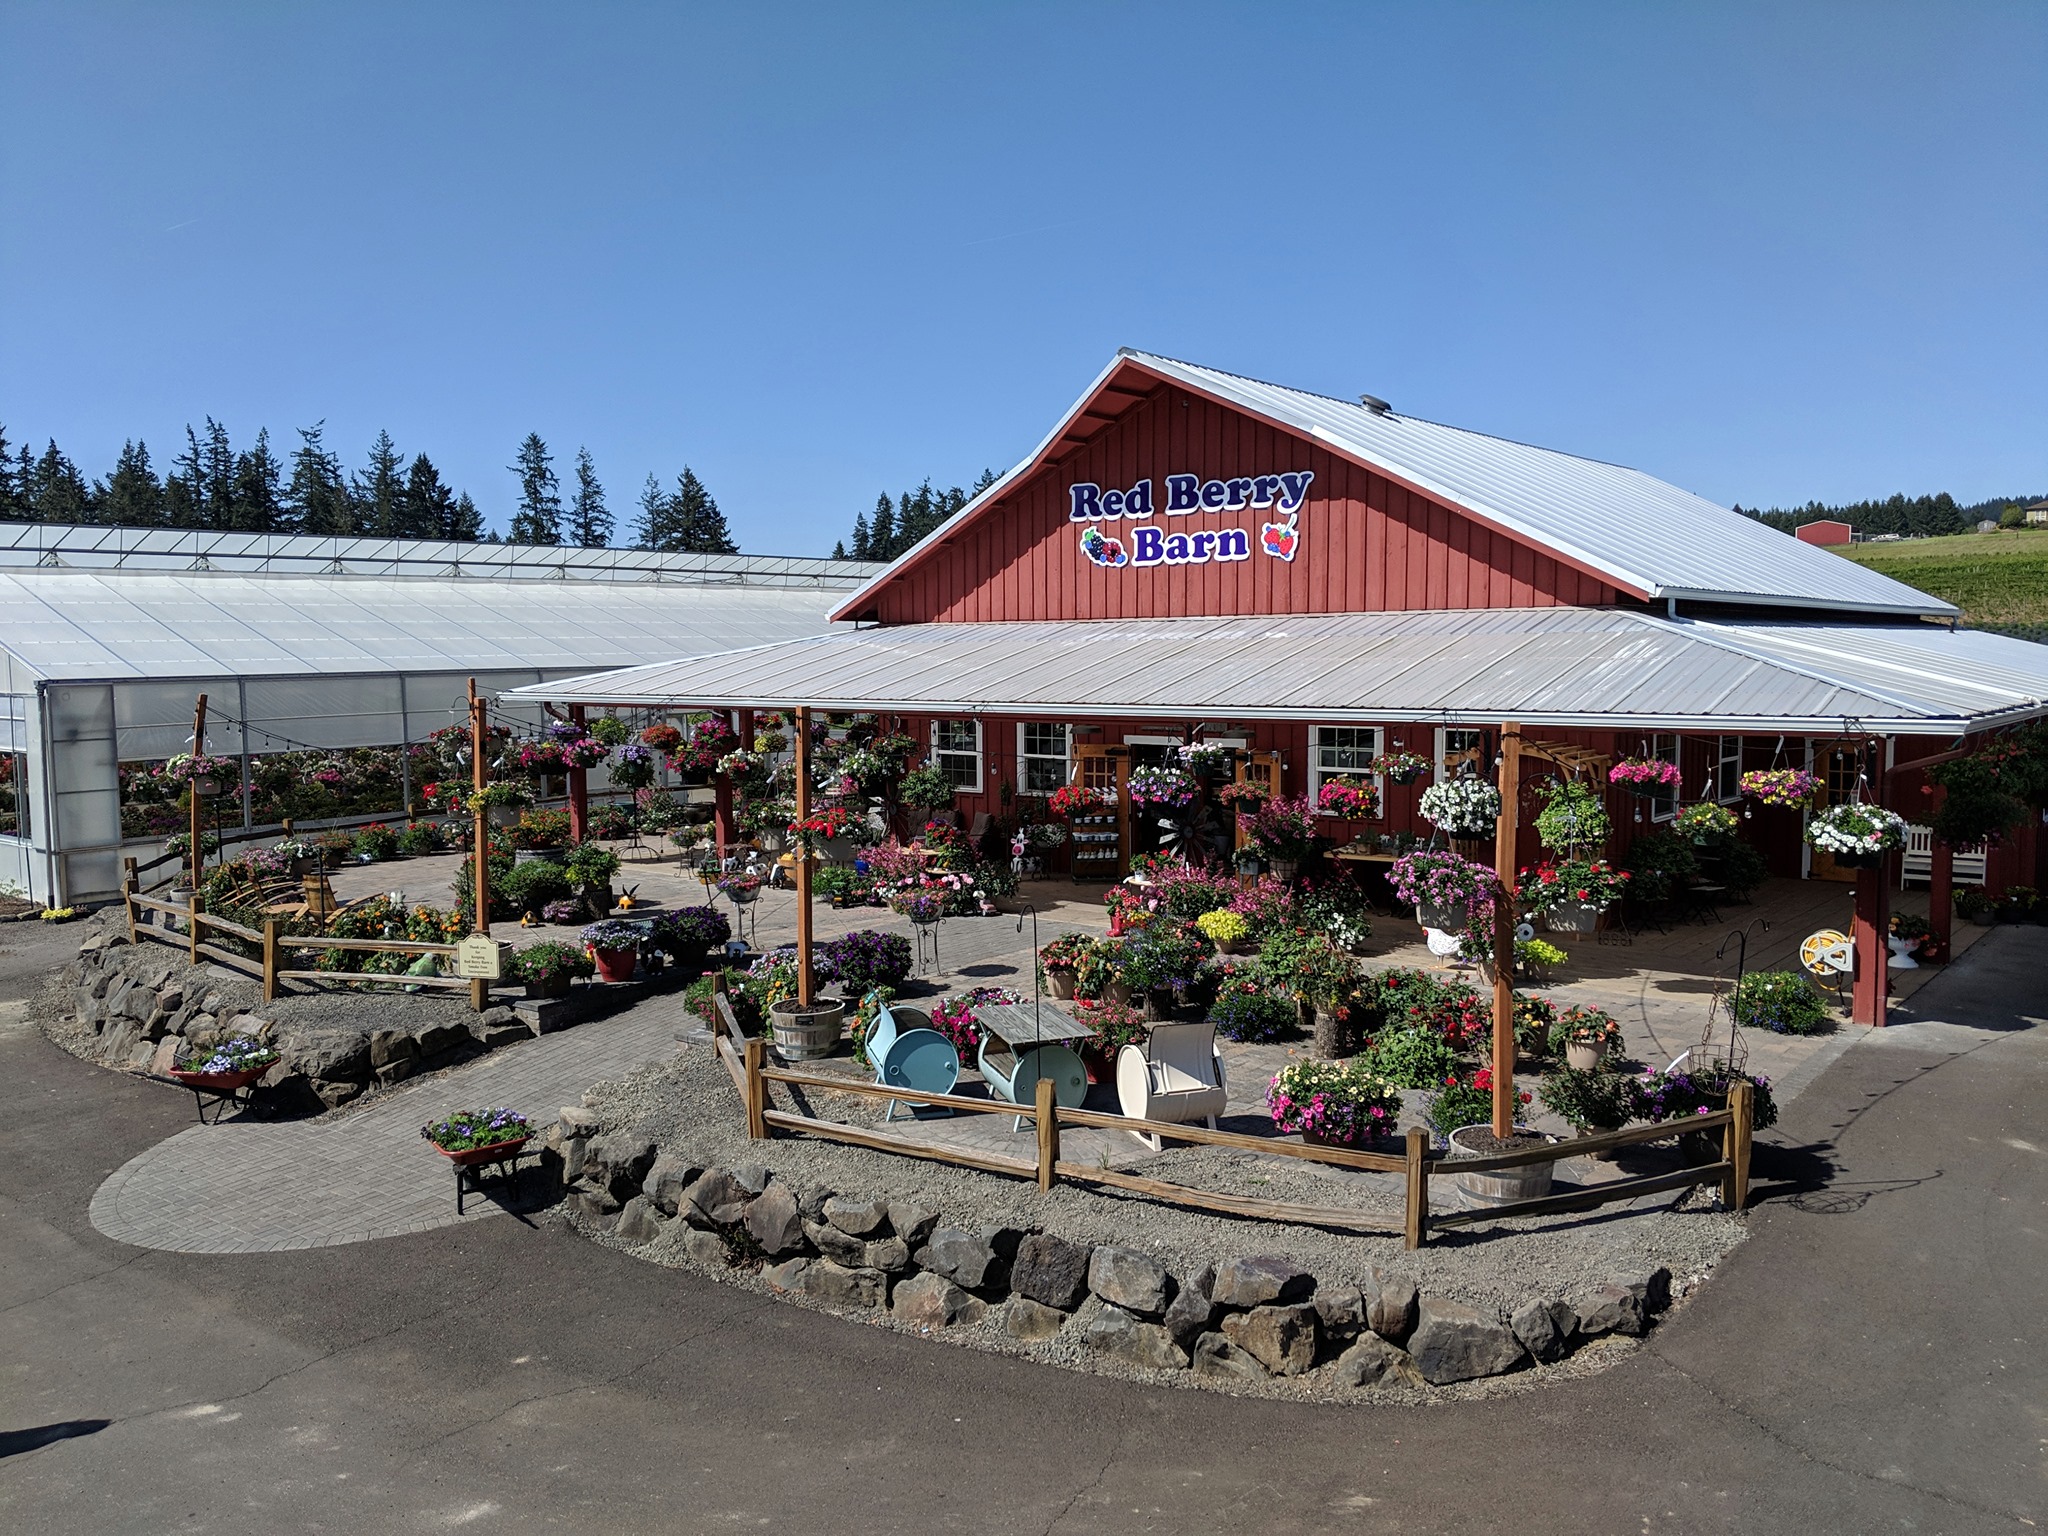 One Apple Cider Donut is Never Enough at This Oregon Country Store